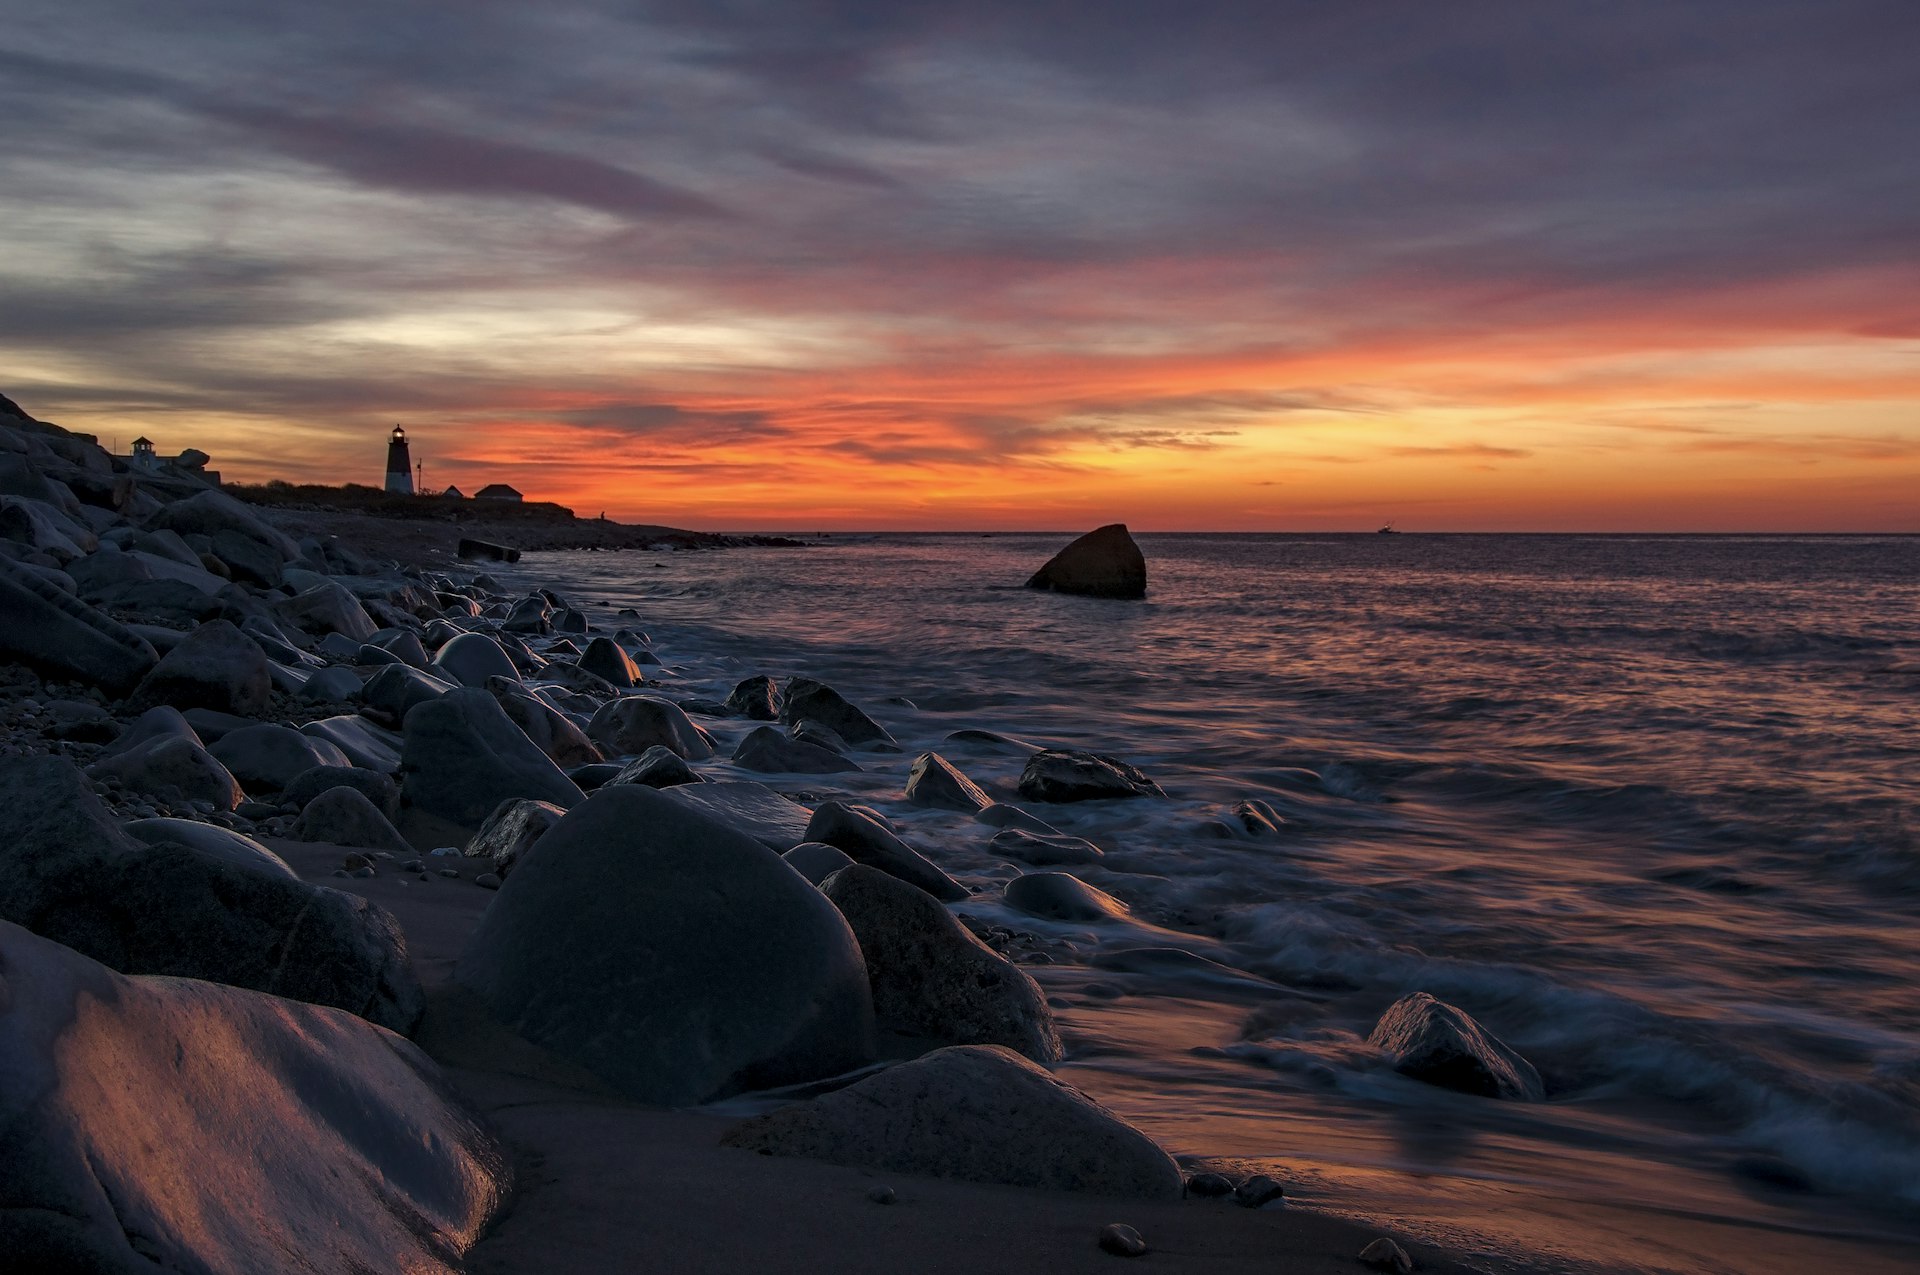 A pink and orange sunrise over a rocky shore with a lighthouse in the distance